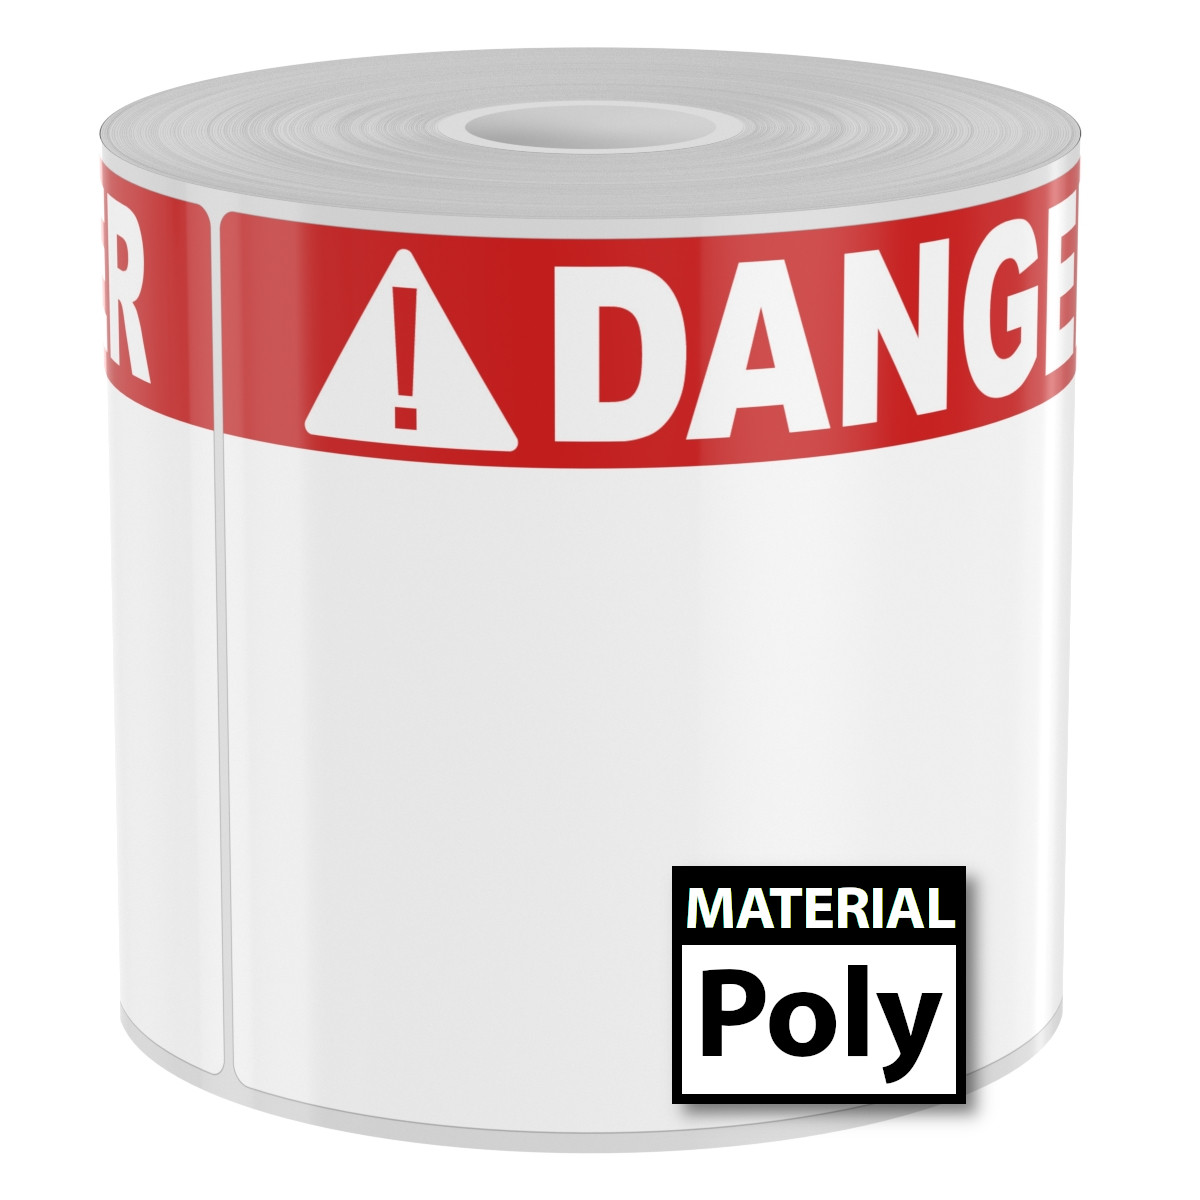 Ask a question about 250 4" x 6" High-Performance Poly Arc Flash labels White Danger on Red Band